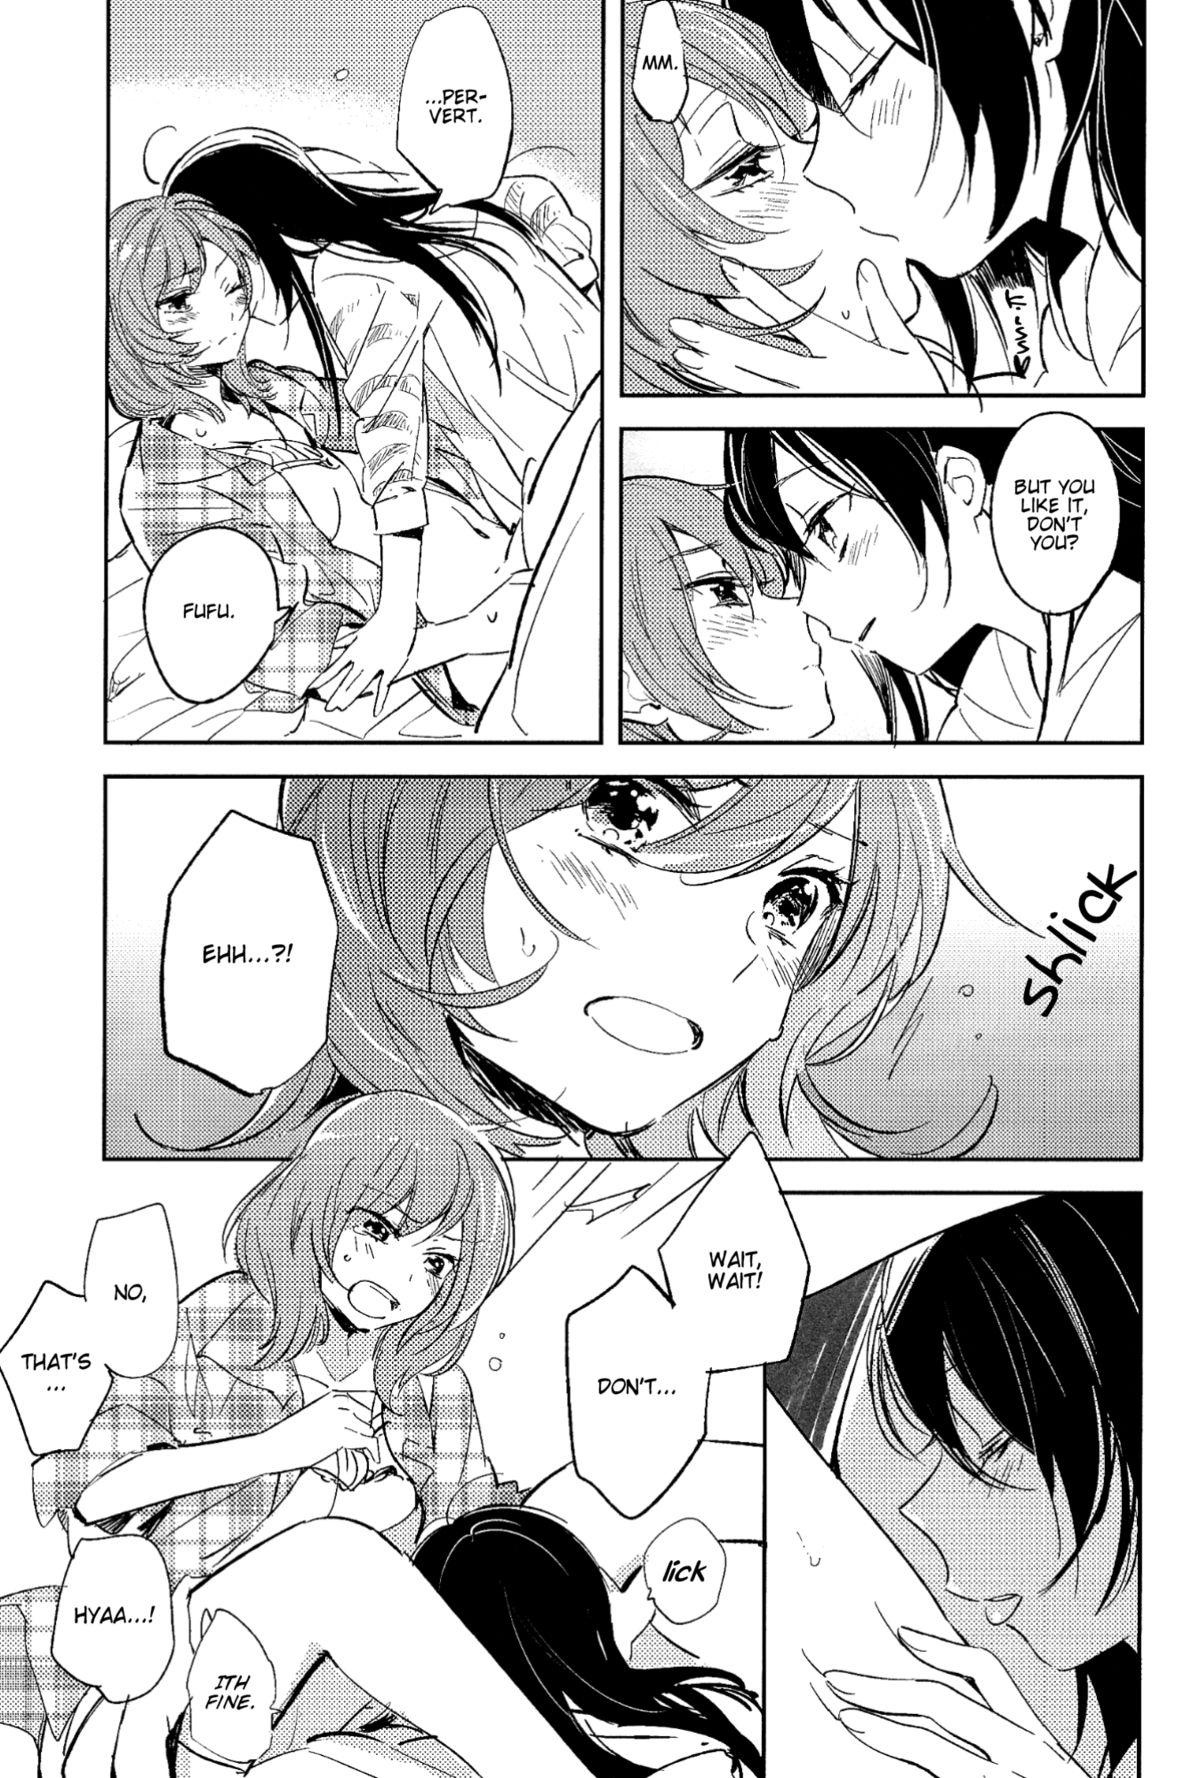 Caught Koibito no Jikan | Time for Lovers - Love live Chaturbate - Page 11